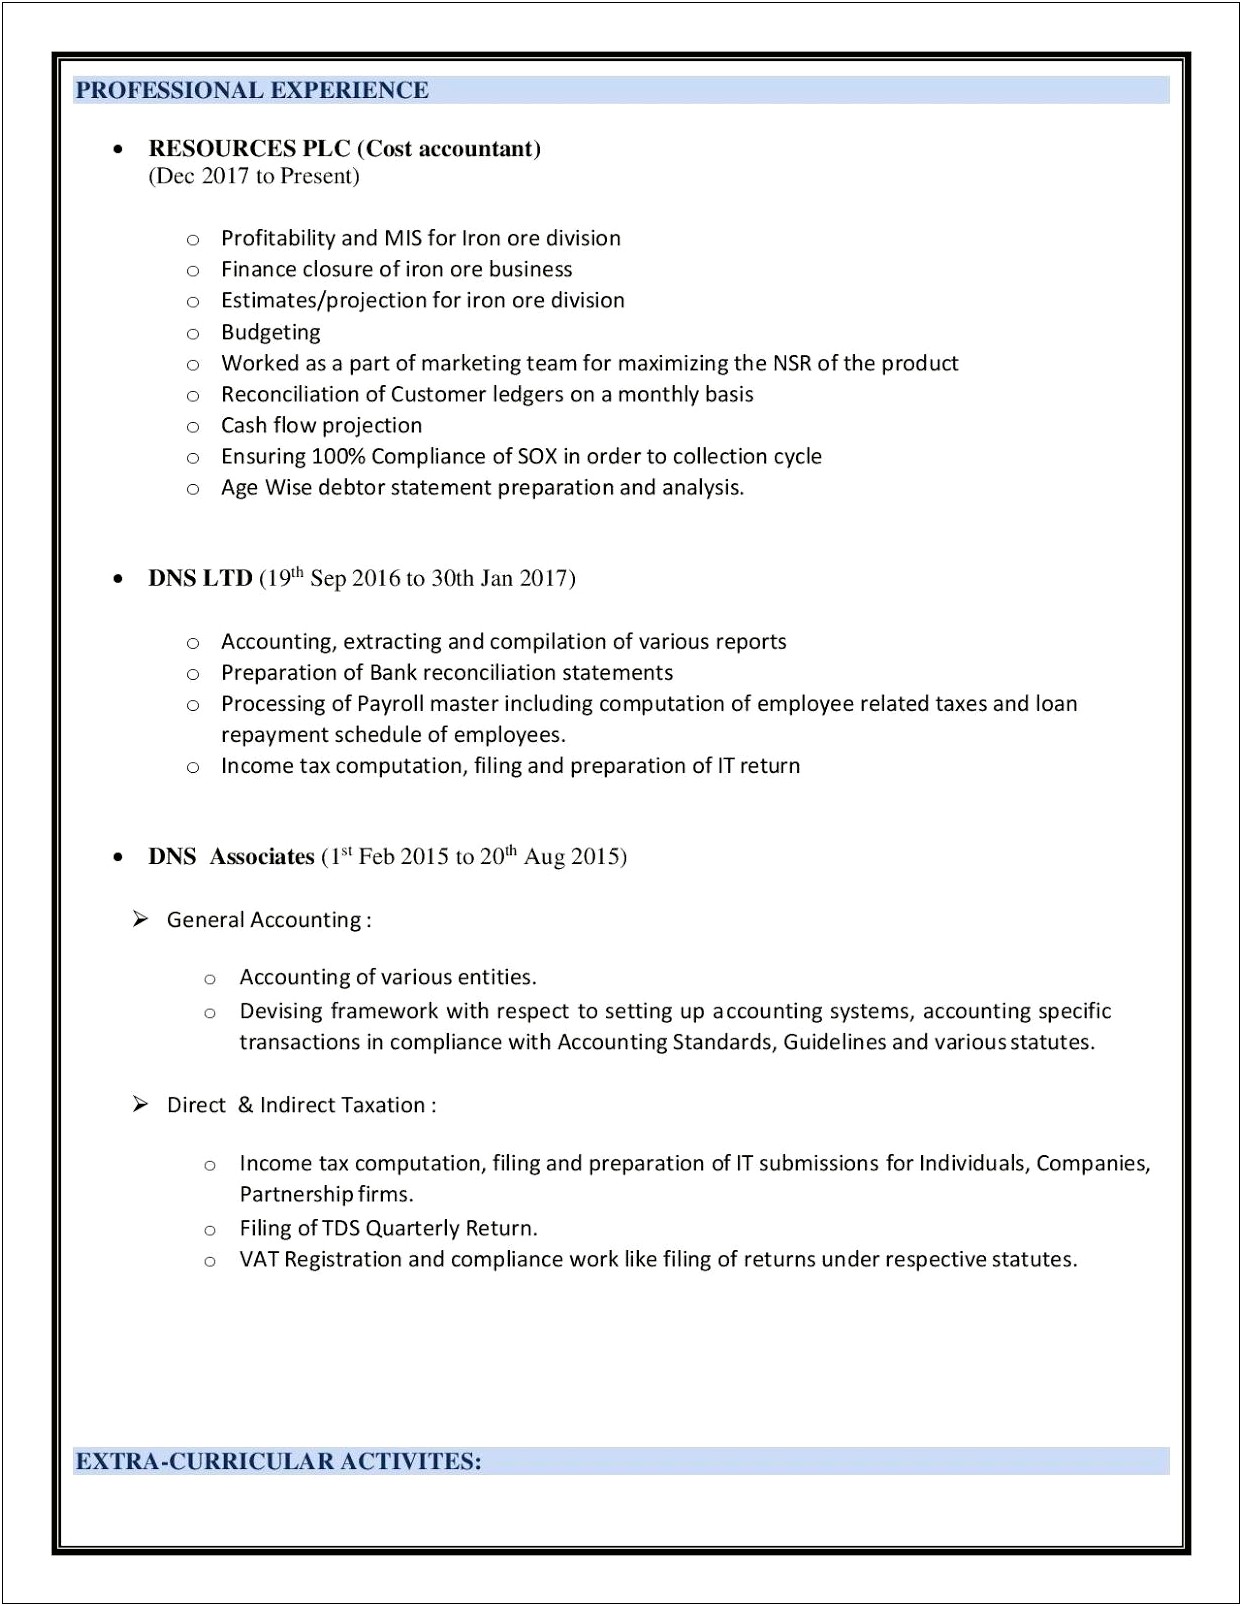 Sample Professional Resume For Cost Accountant